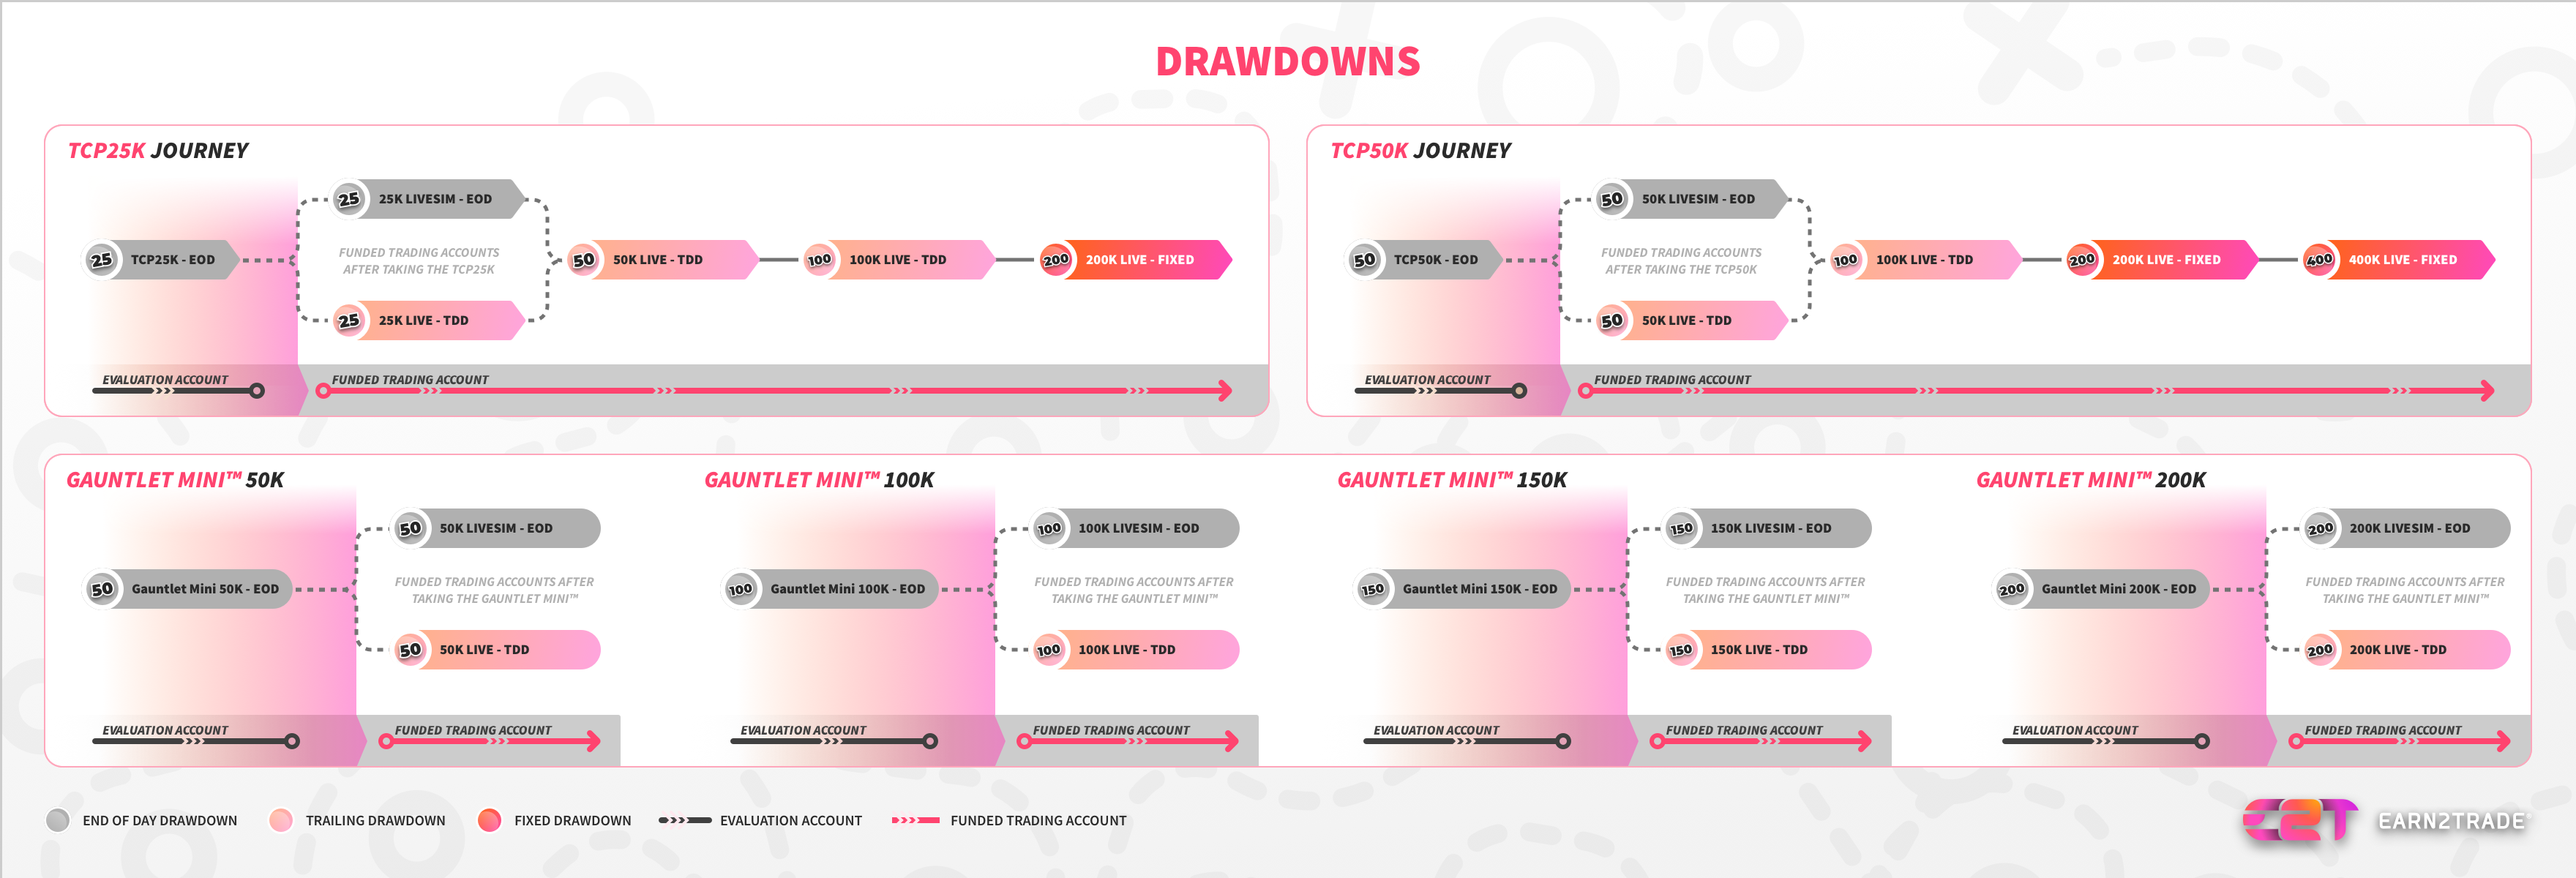 What are the different drawdown types?